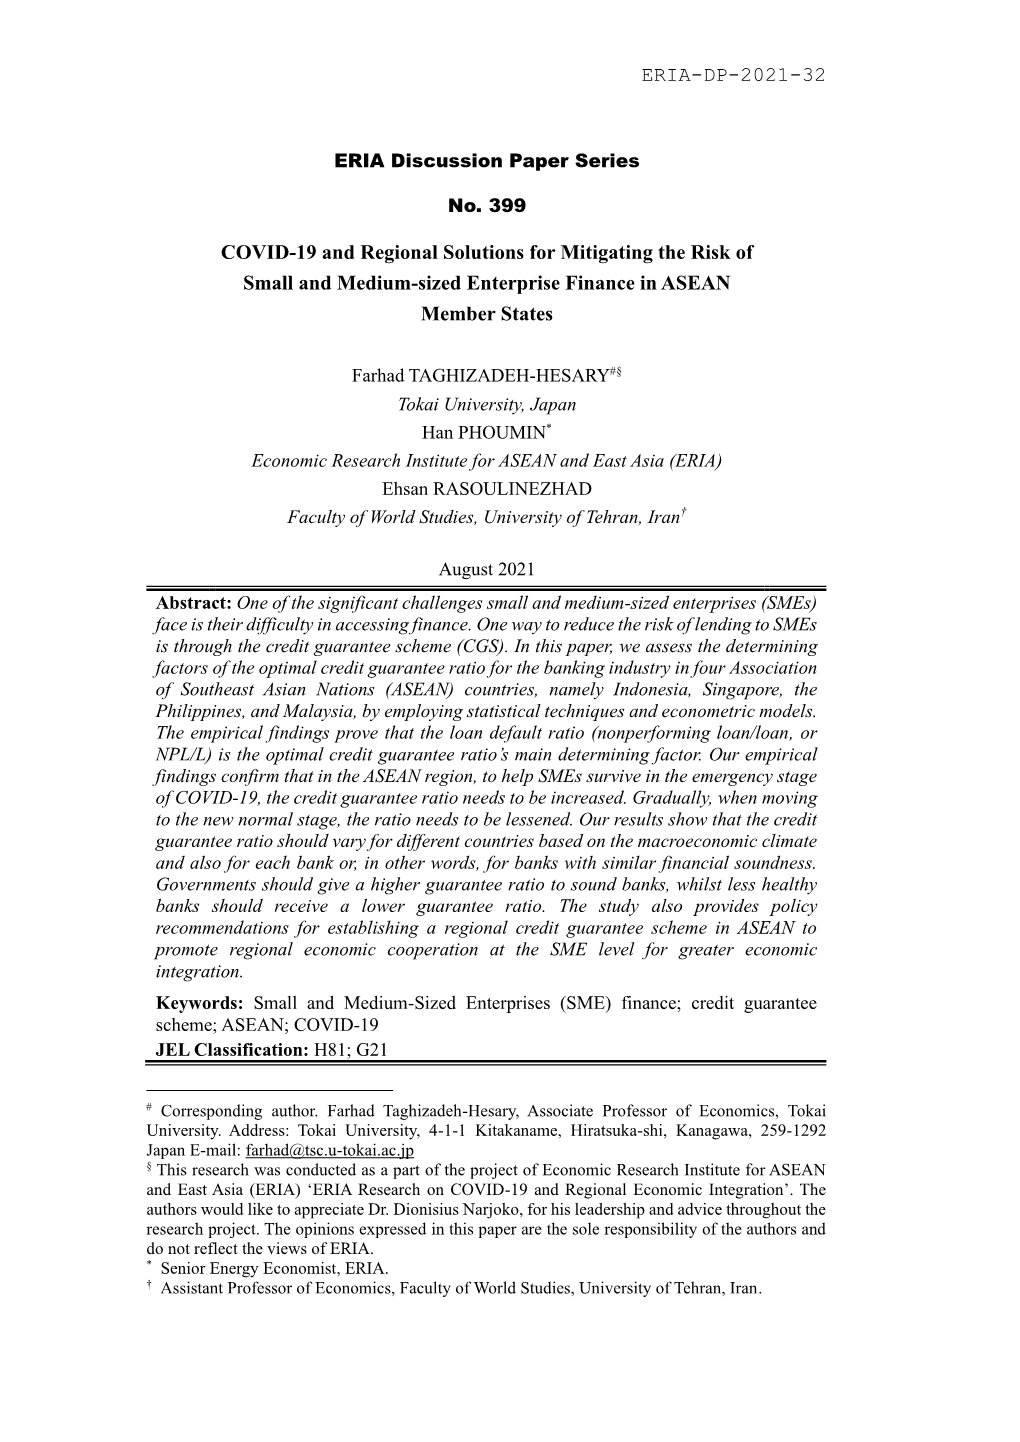 COVID-19 and Regional Solutions for Mitigating the Risk of Small and Medium-Sized Enterprise Finance in ASEAN Member States